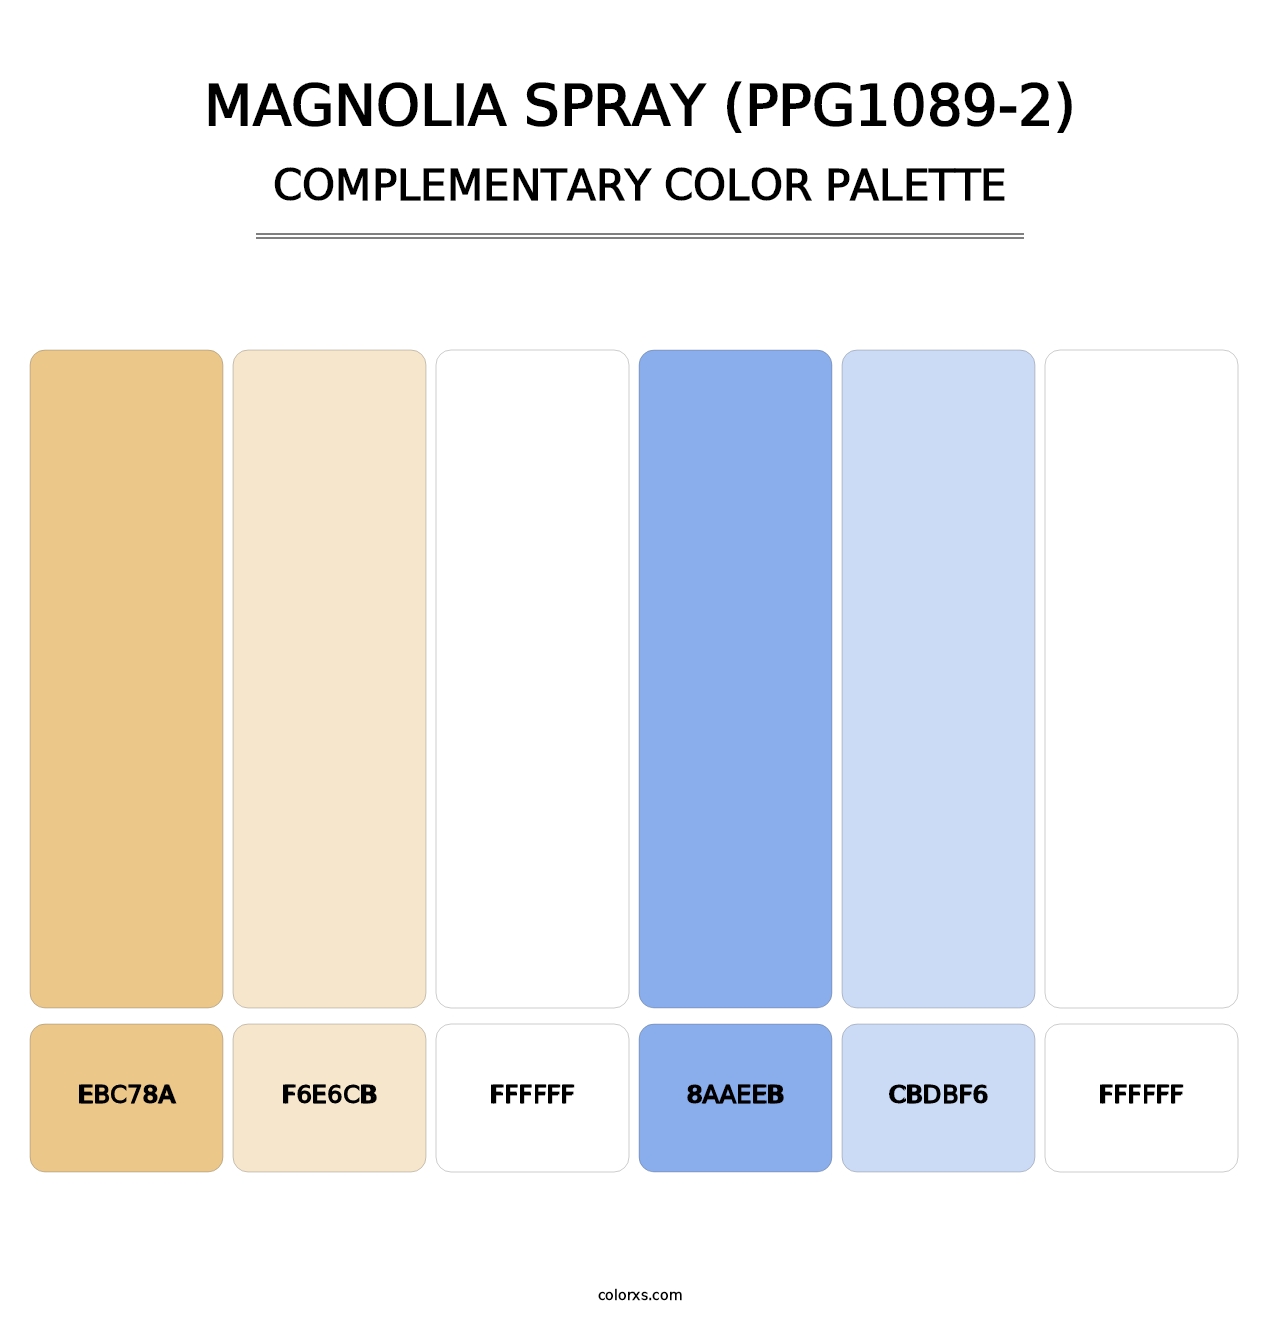 Magnolia Spray (PPG1089-2) - Complementary Color Palette